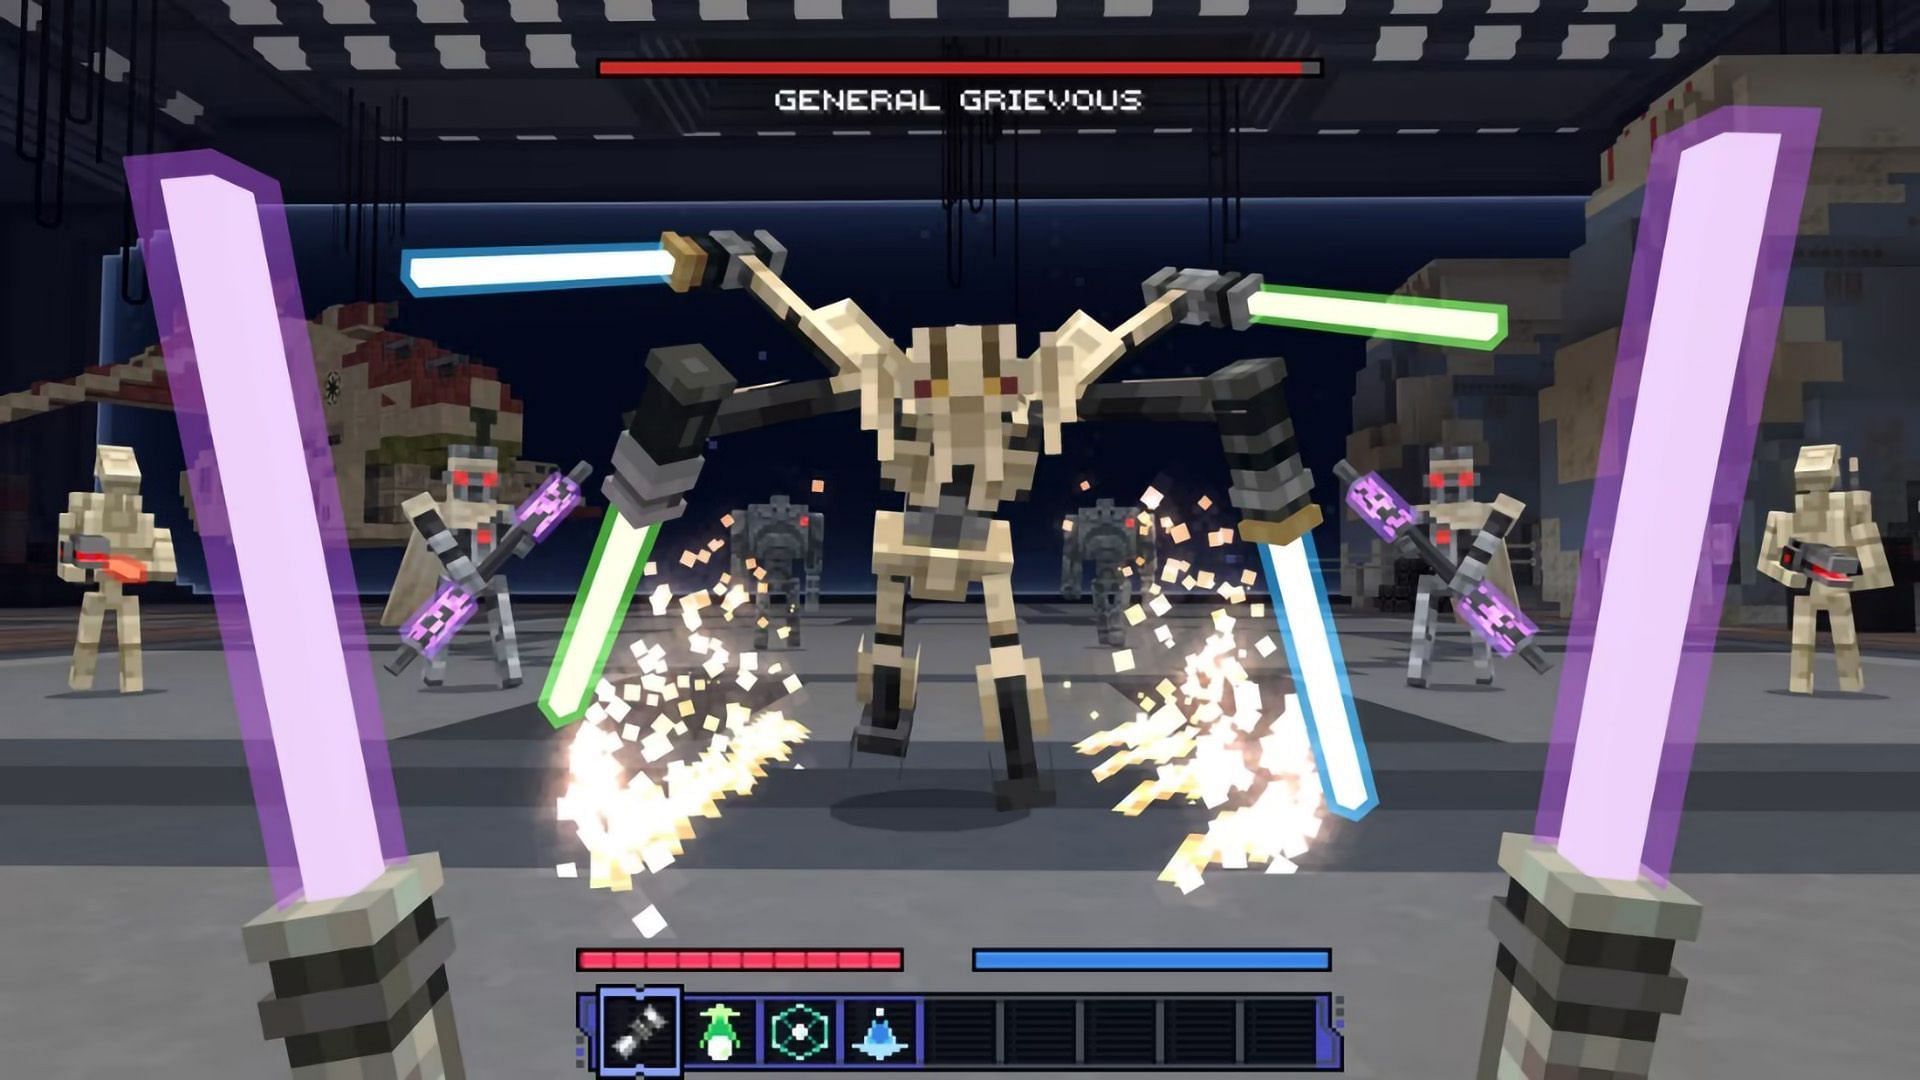 Fight the dreaded General Grievous in the Clone Wars (Image via Mojang)